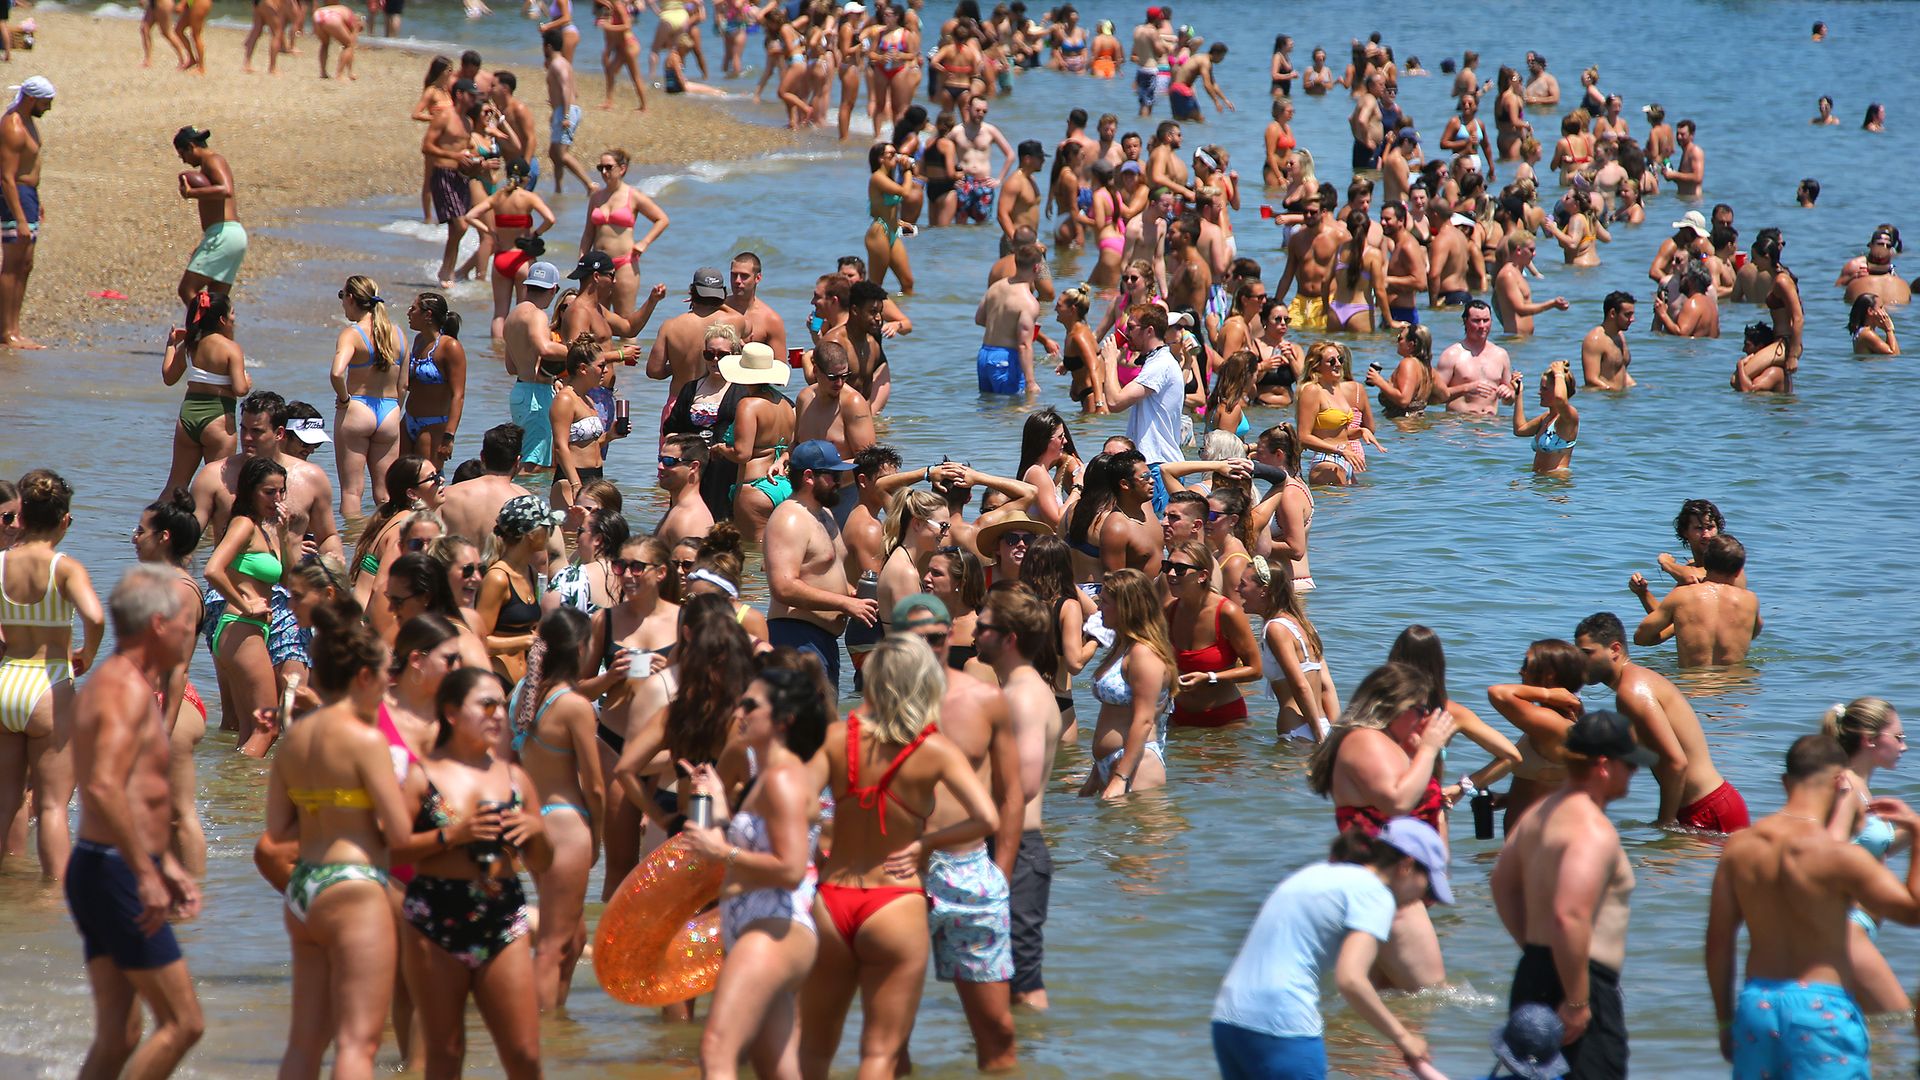 Hundreds of beachgoers pack in without social distancing